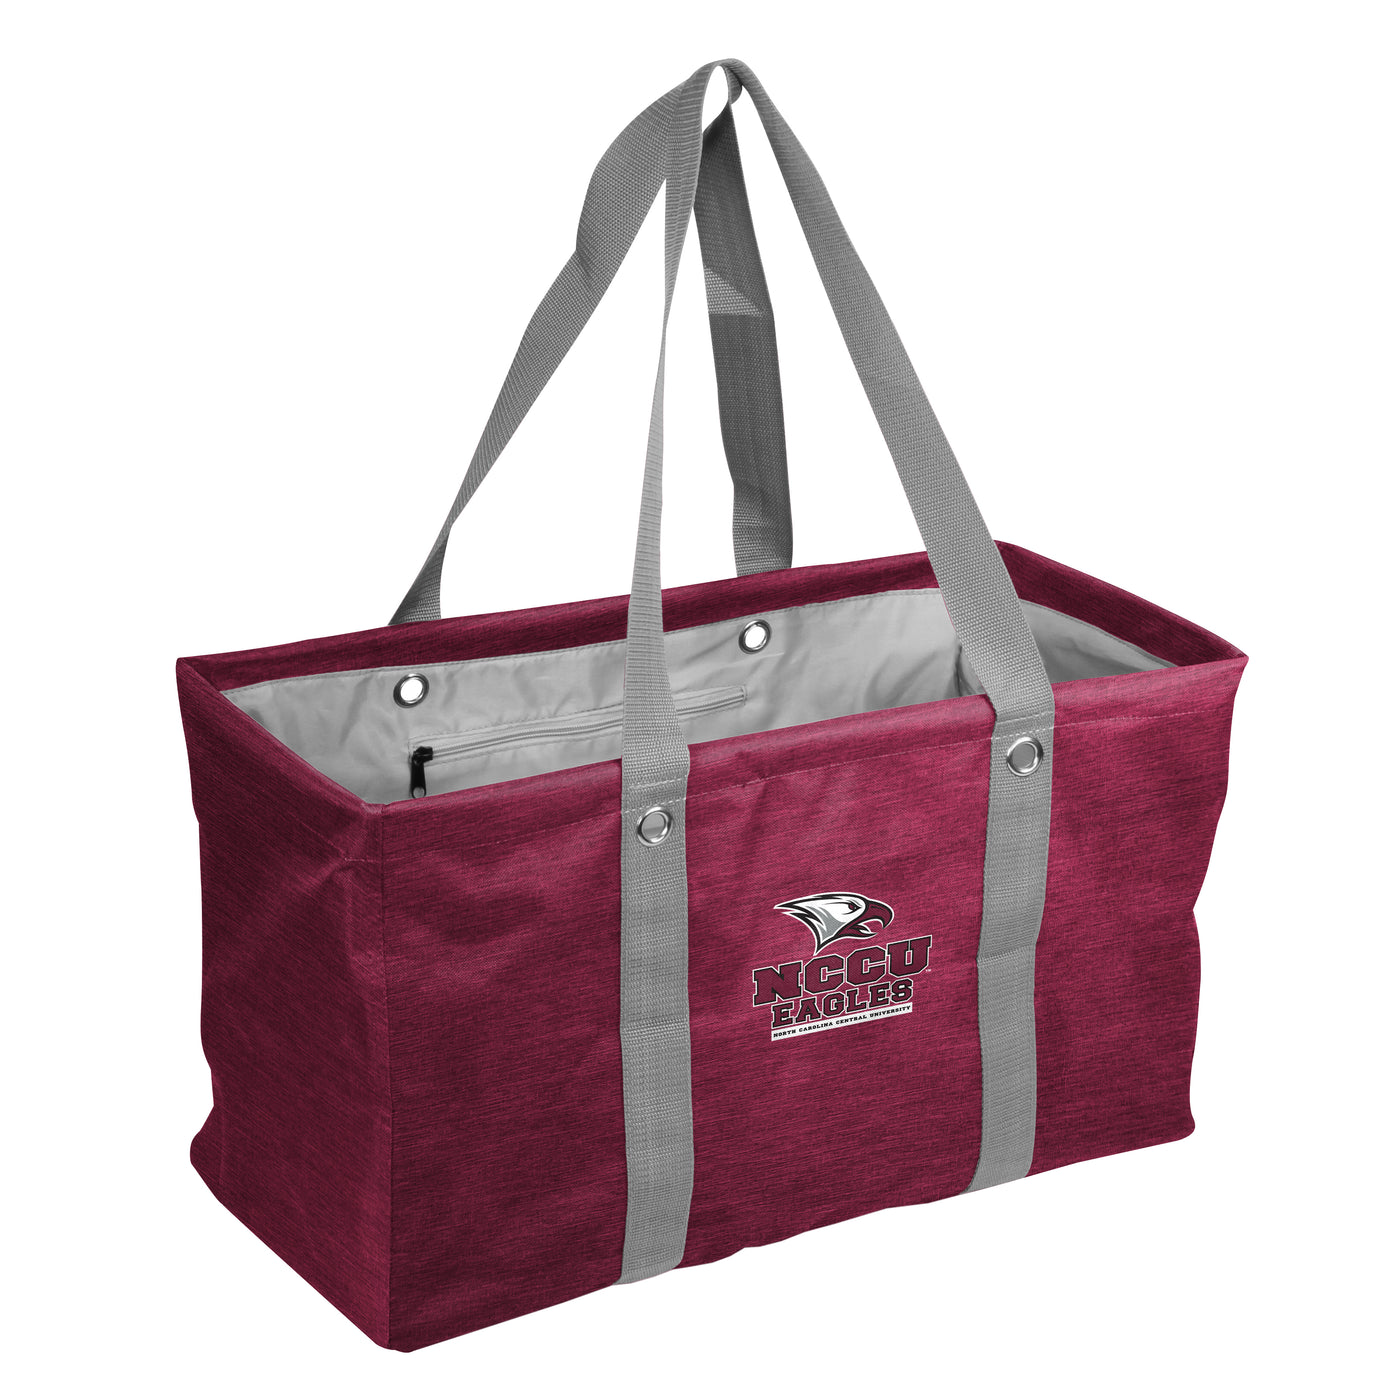 NC Central Picnic Caddy